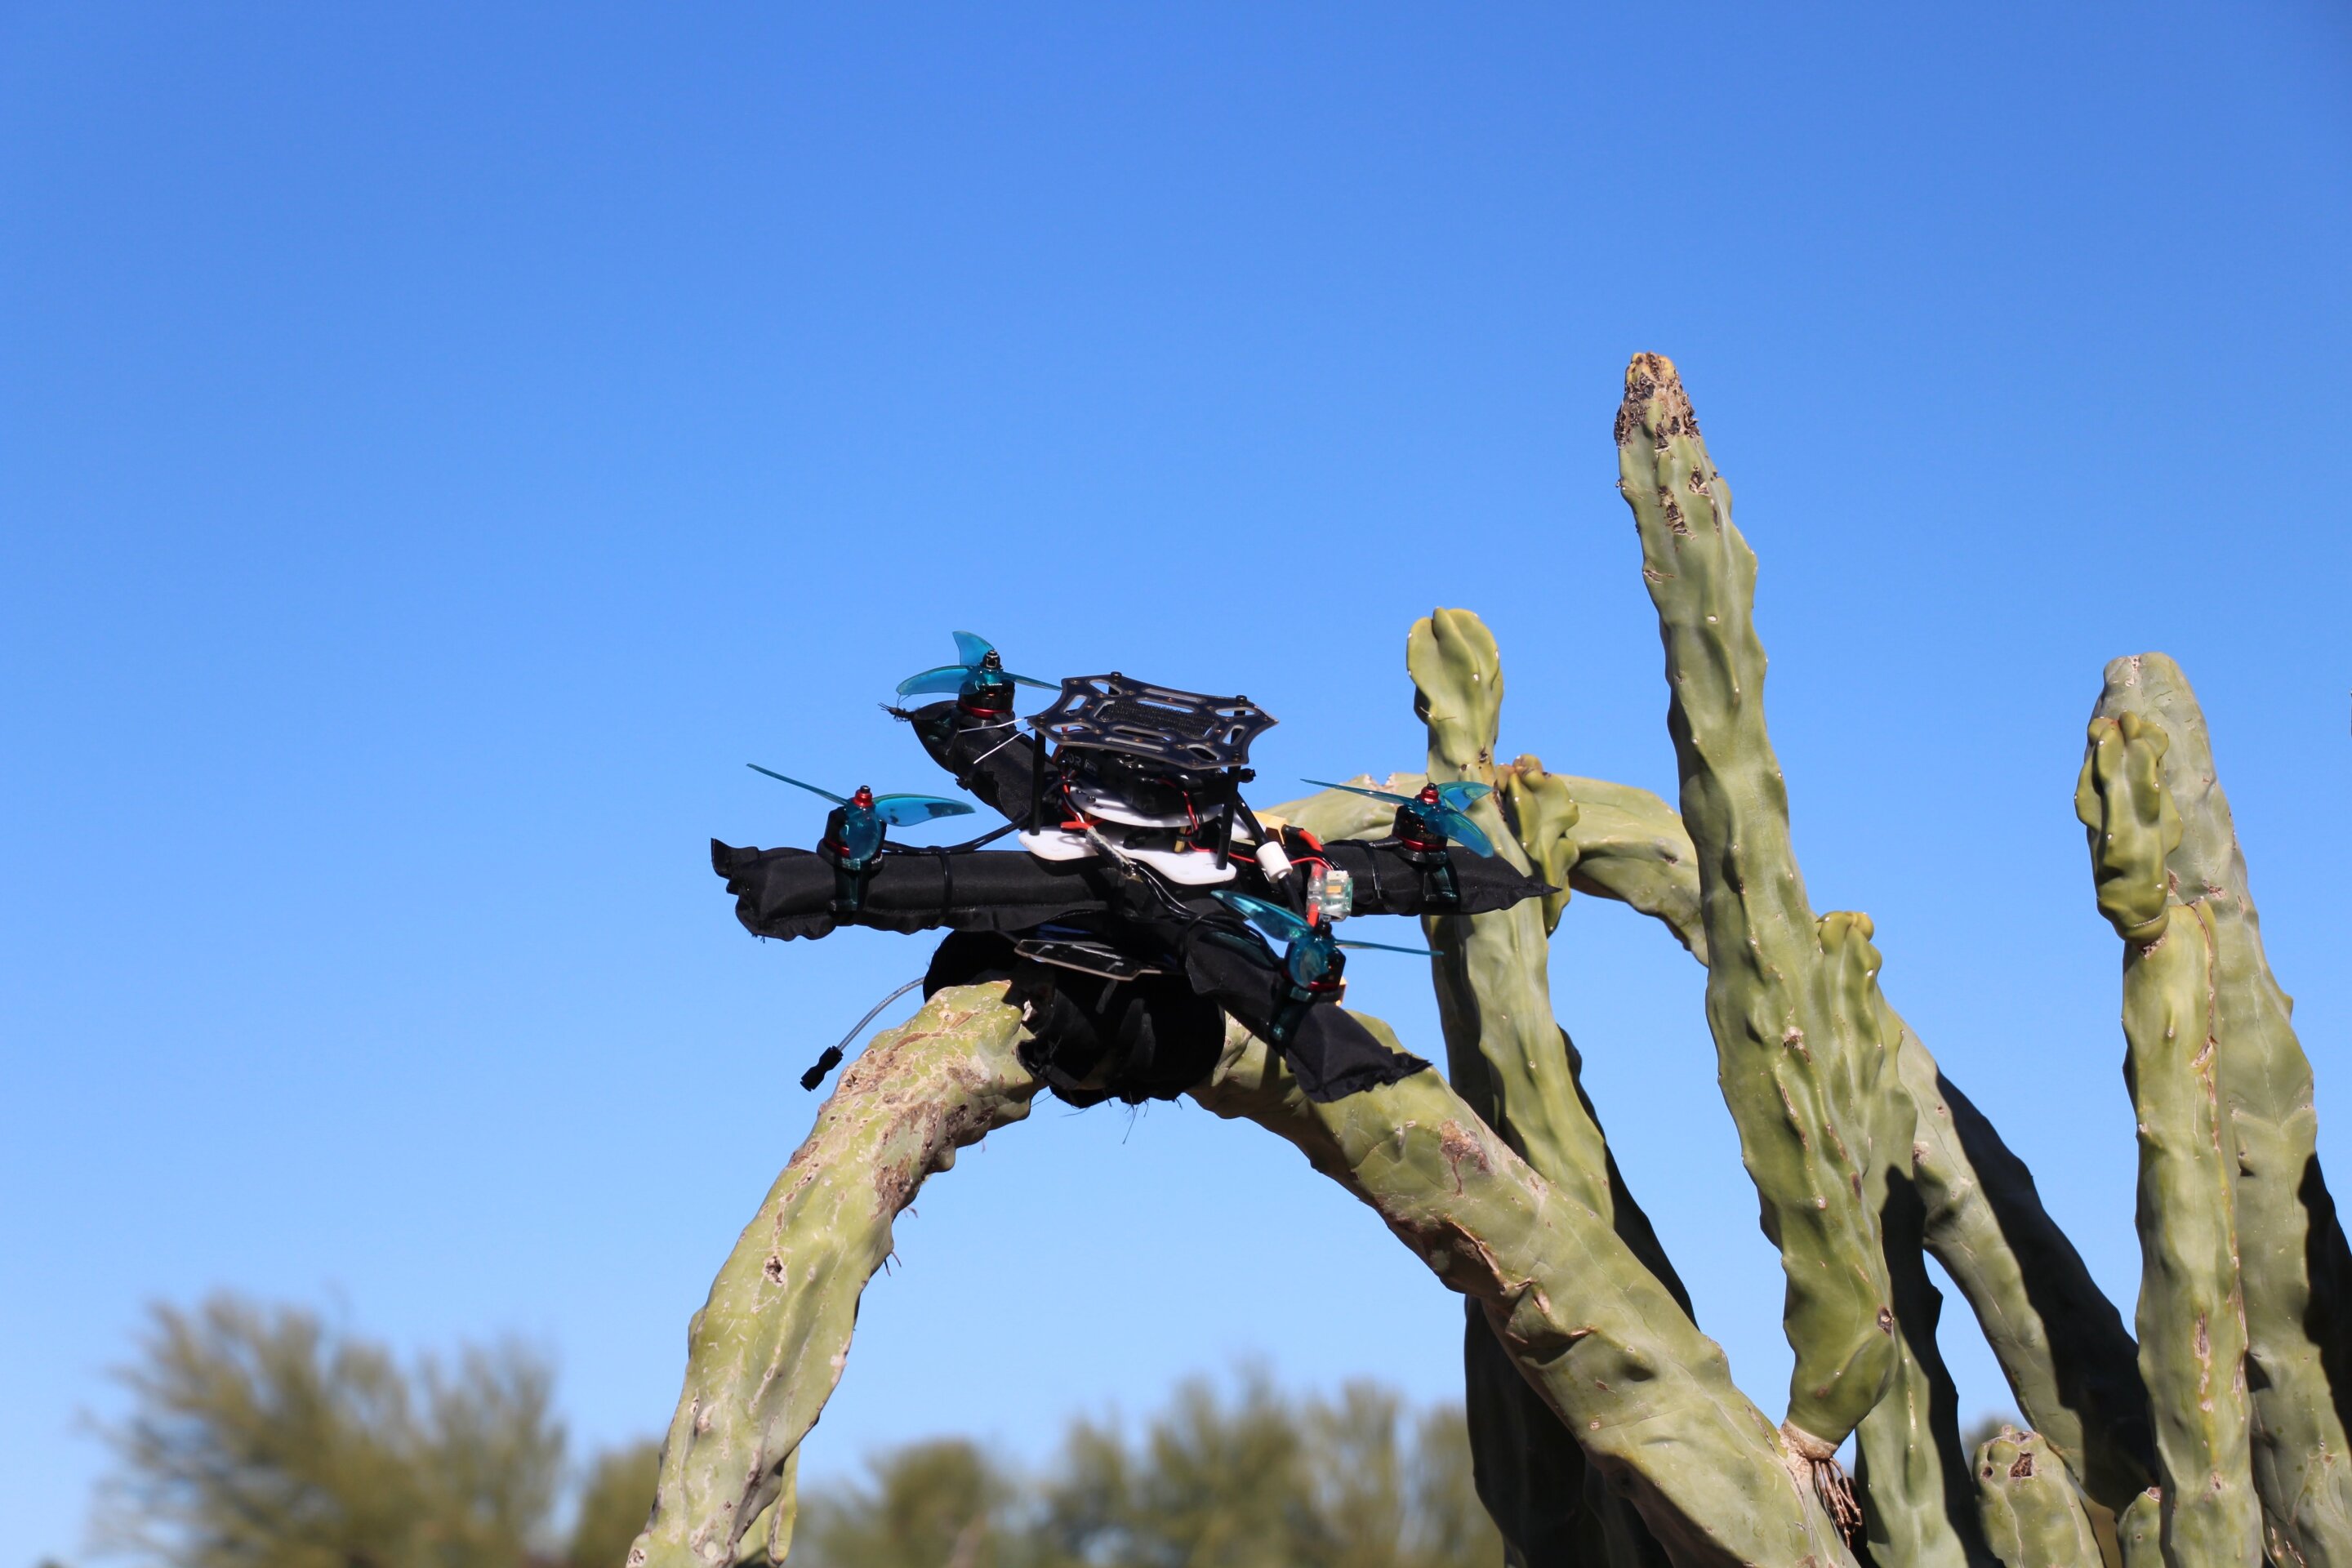 Built to bounce back: Robotics researchers design drone to cope with collisions